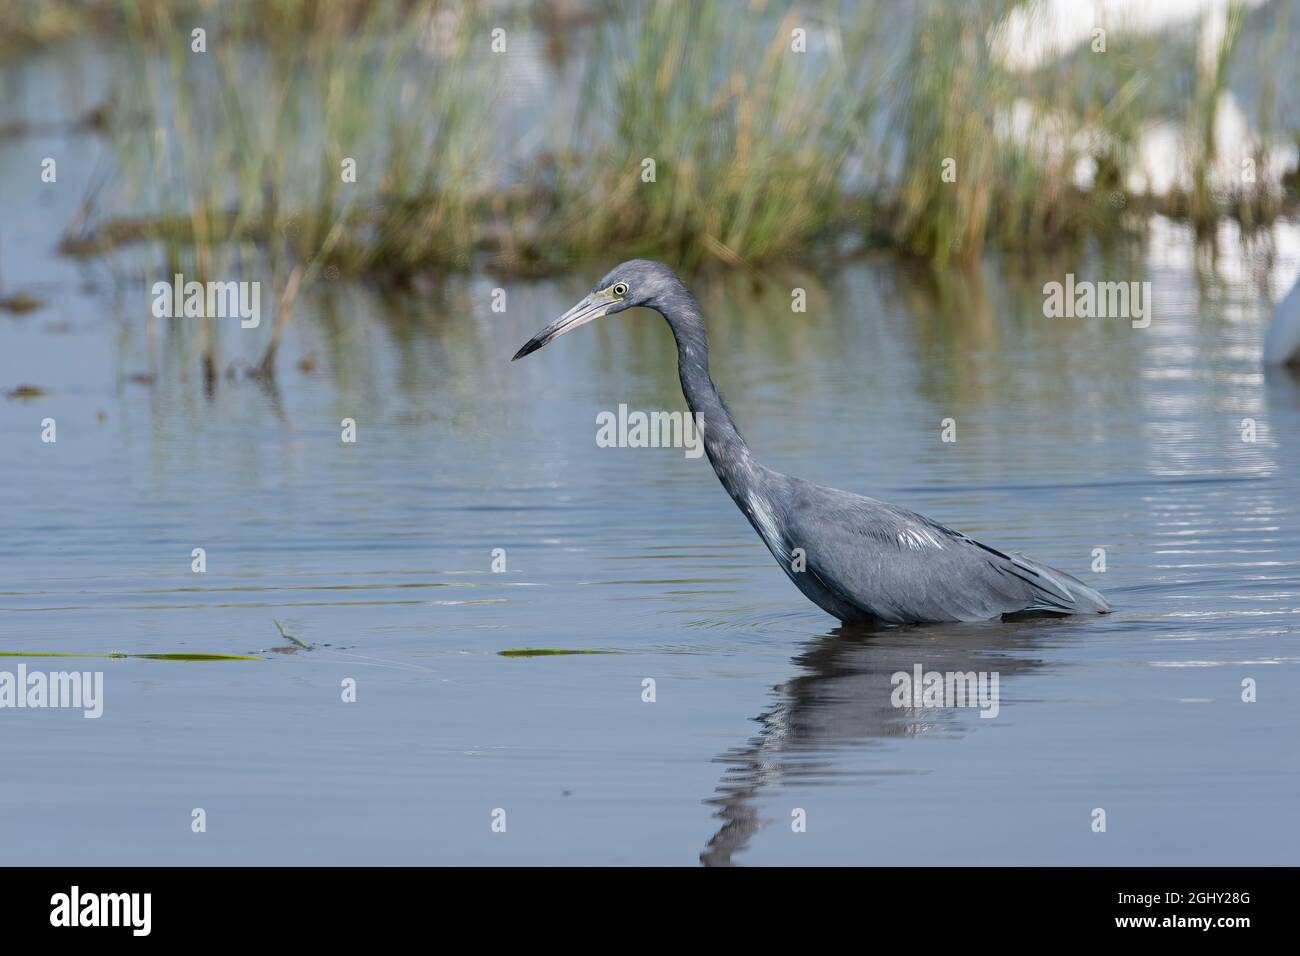 A Little Blue Heron searching for food as it wades in the water of a lake near the grassy shoreline. Stock Photo